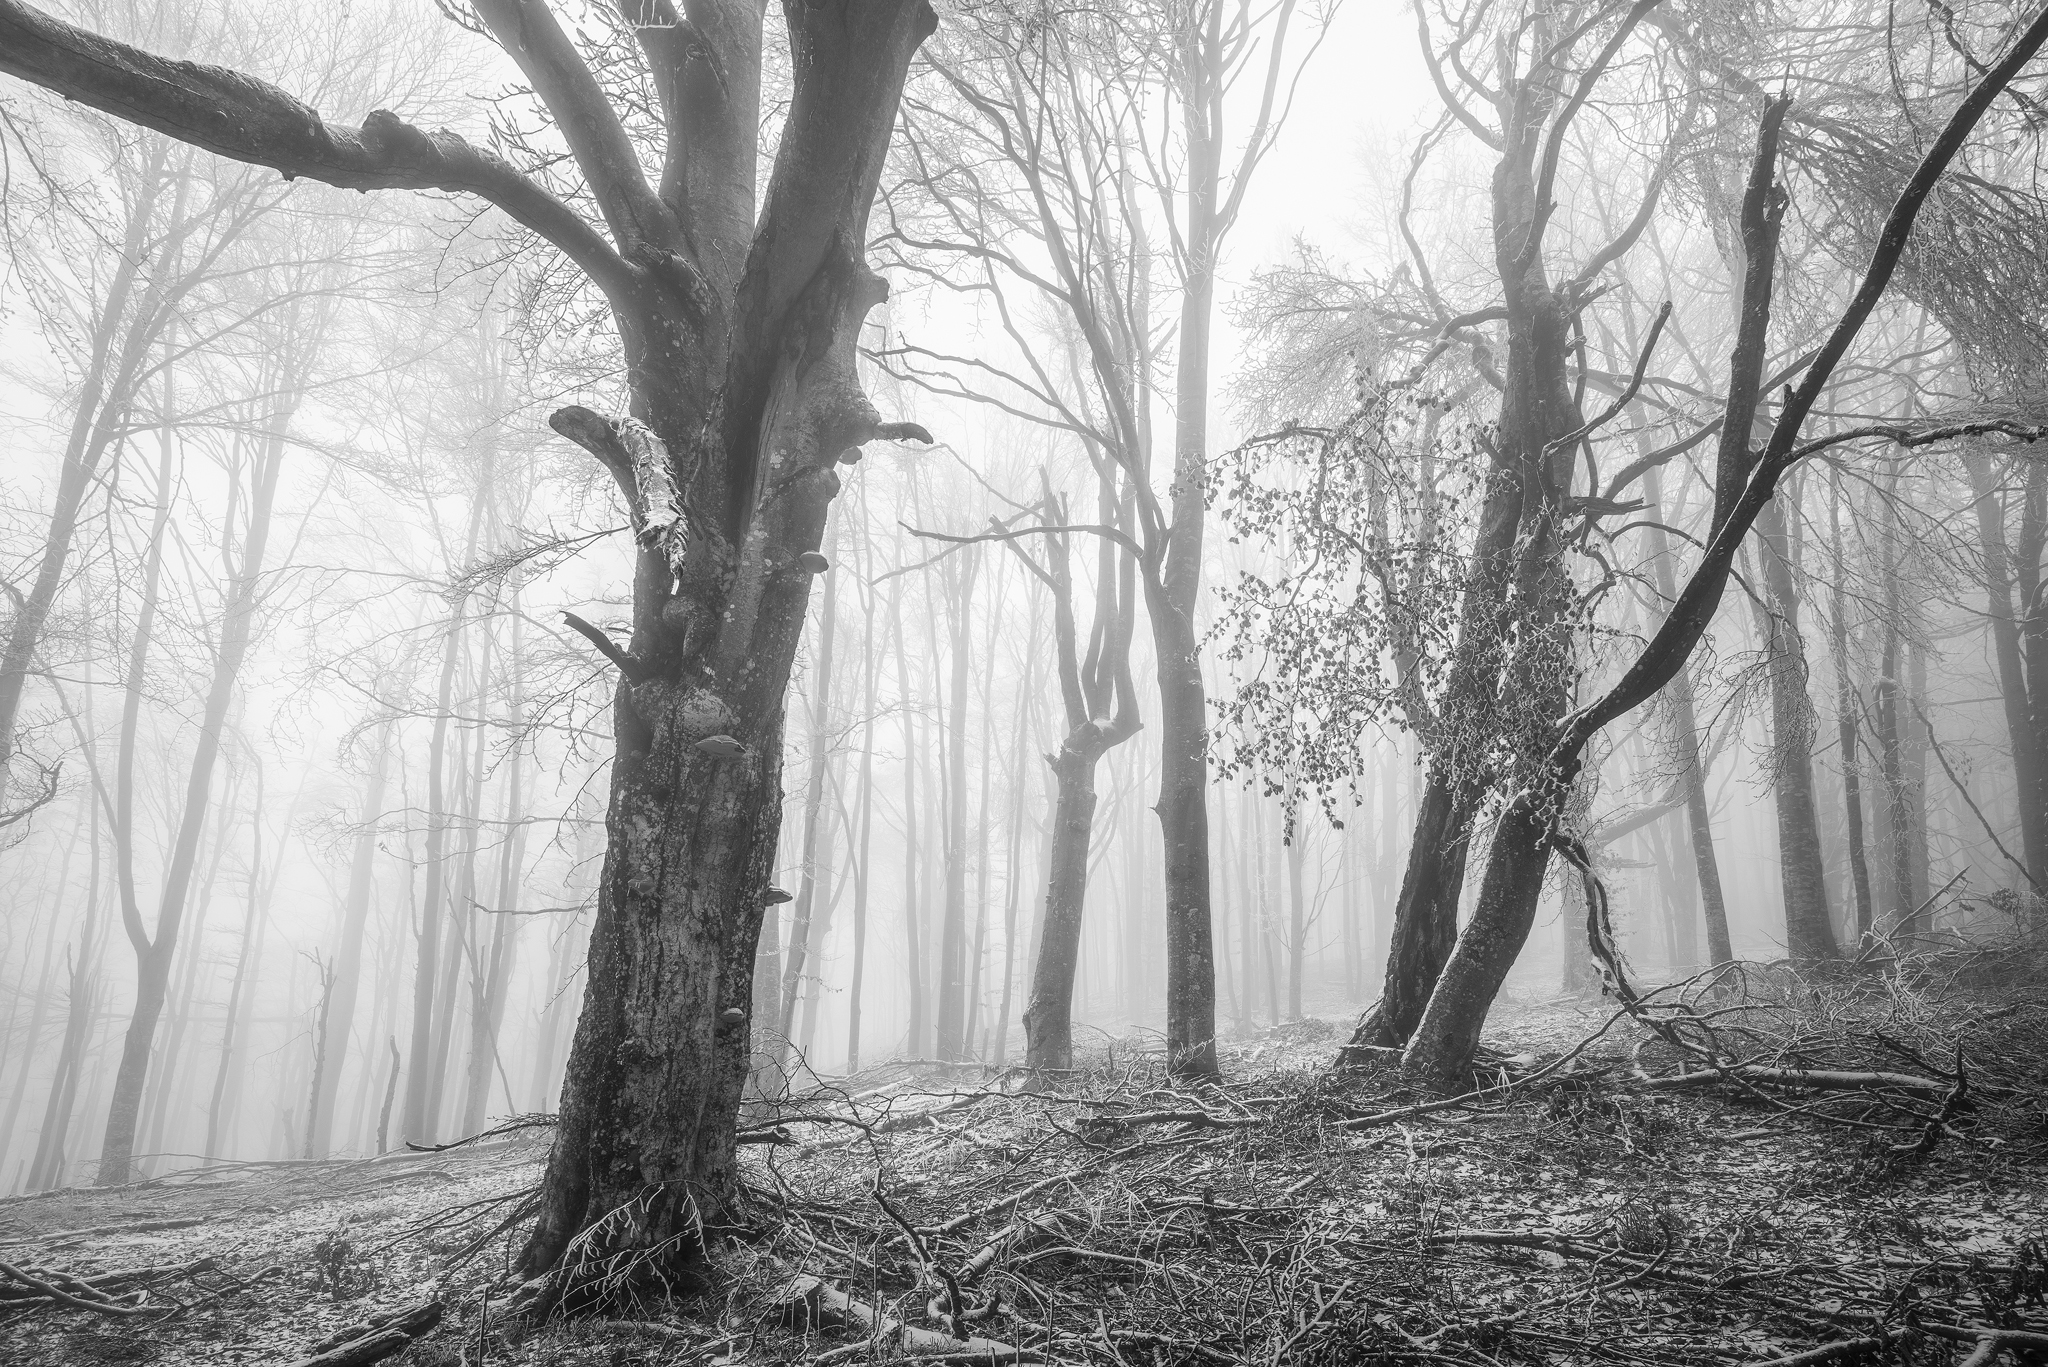 Mist Low Saturation Monochrome Forest Trees Cold Winter Frost Nature Outdoors Photography Andras Sza 2048x1367